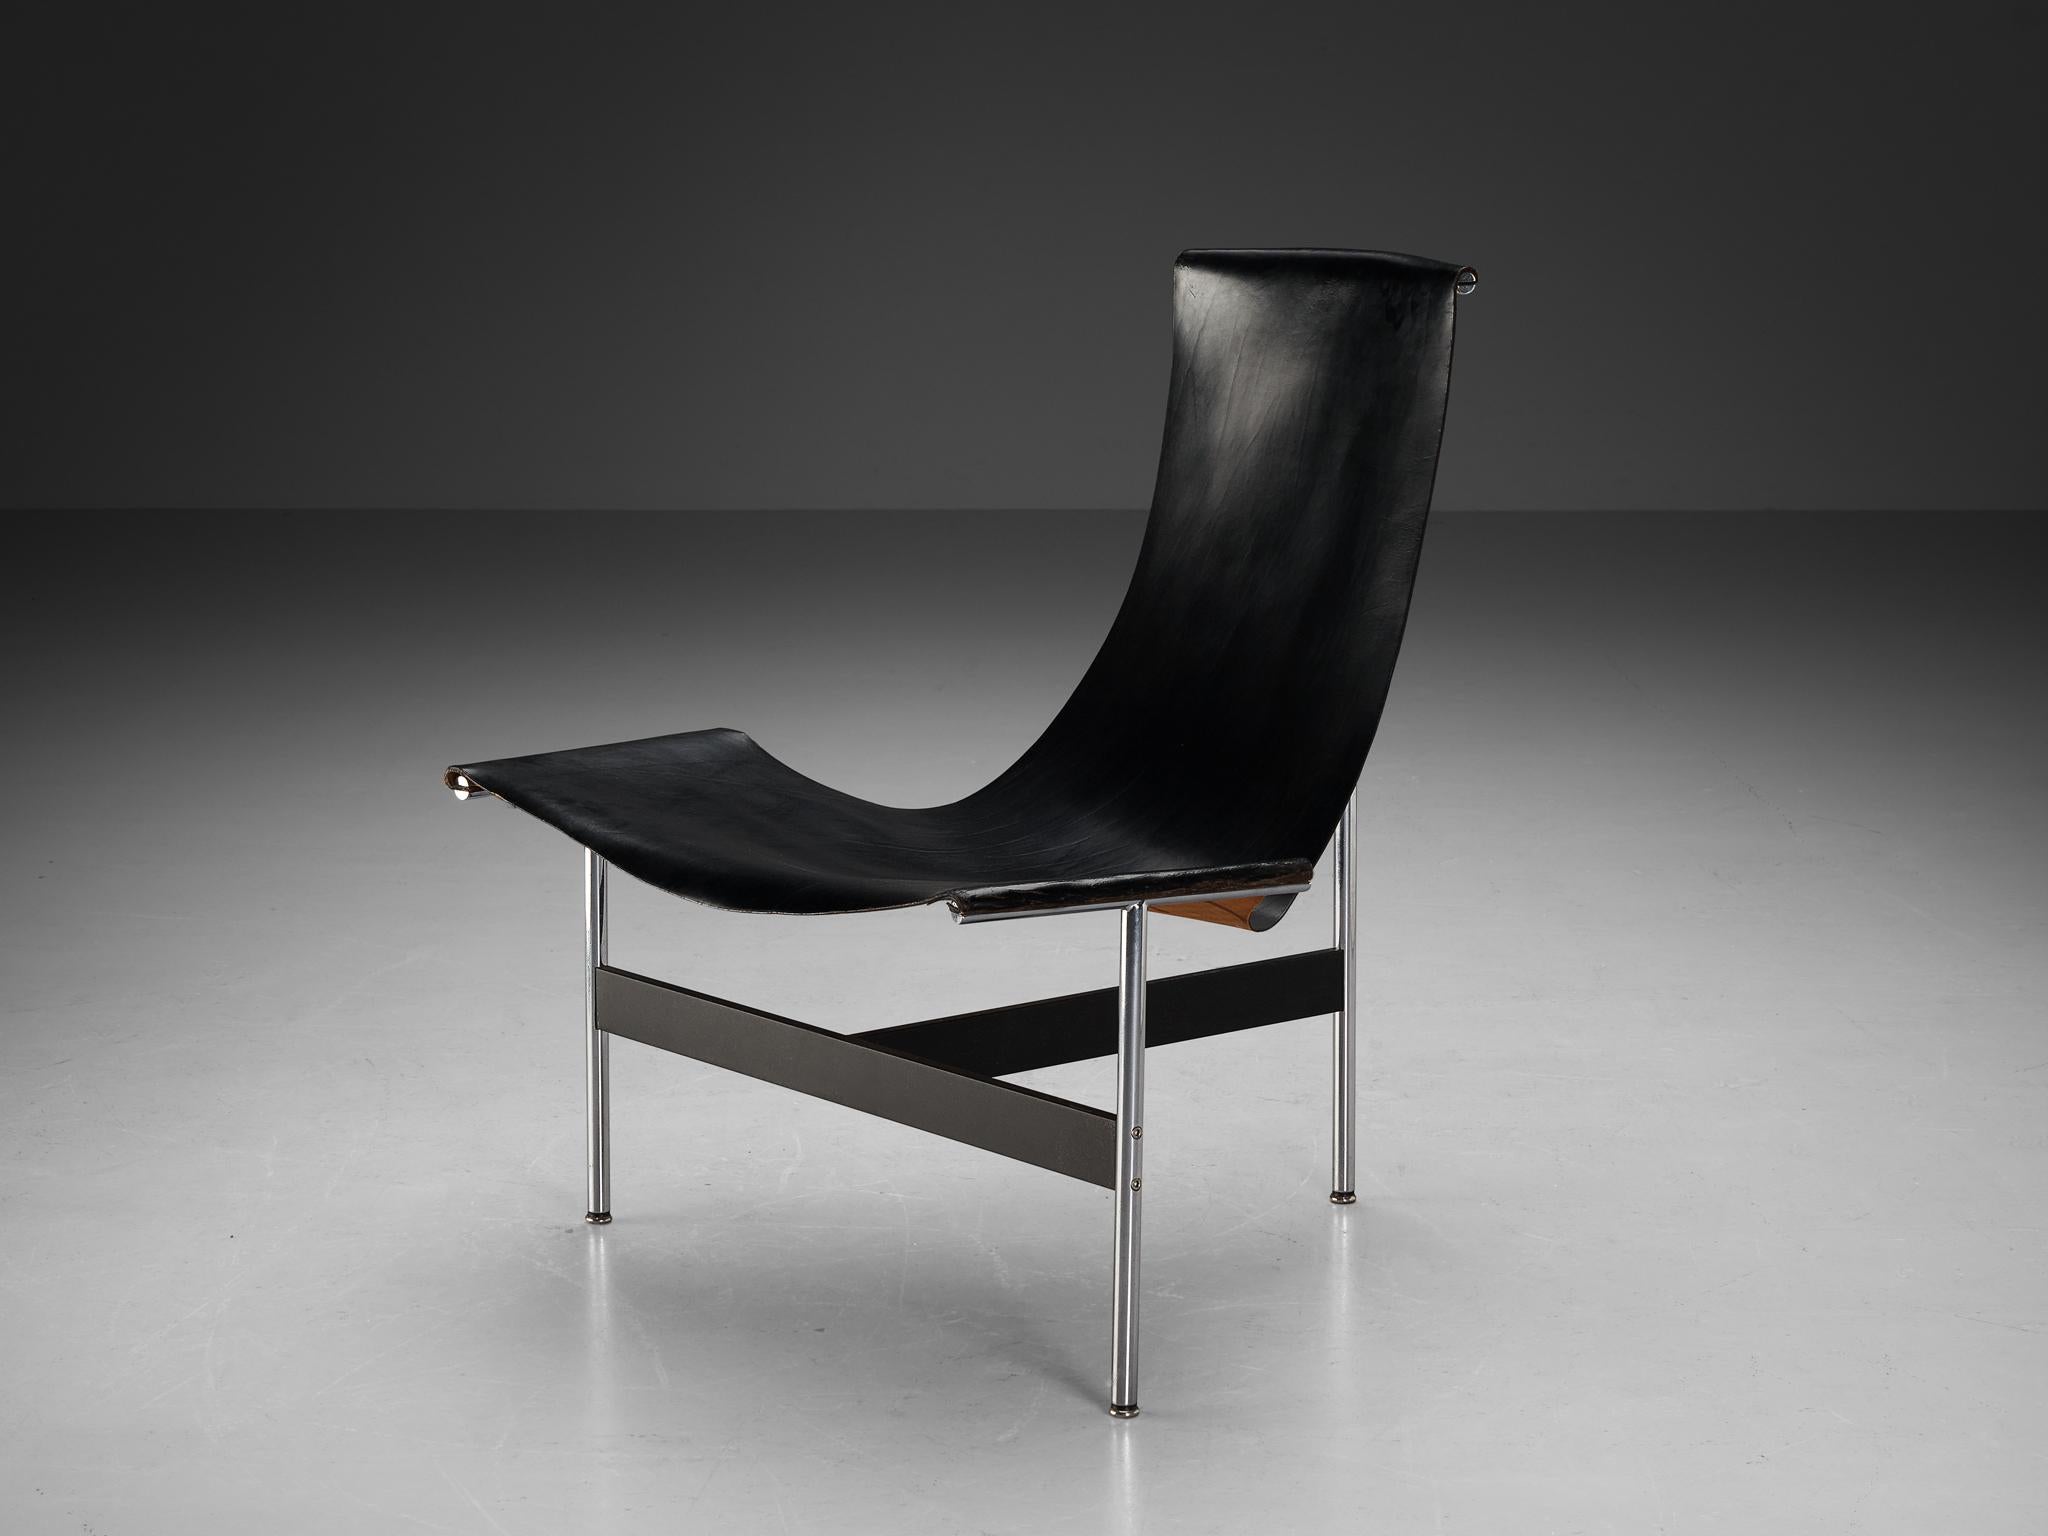 William Katavolos, Ross Littell, and Douglas Kelley for Laverne International, lounge chair, model '3LC', chrome-plated steel, coated steel, leather United States, 1952

William Katavolos designed, together with Douglas Kelley & Ross Littell, the